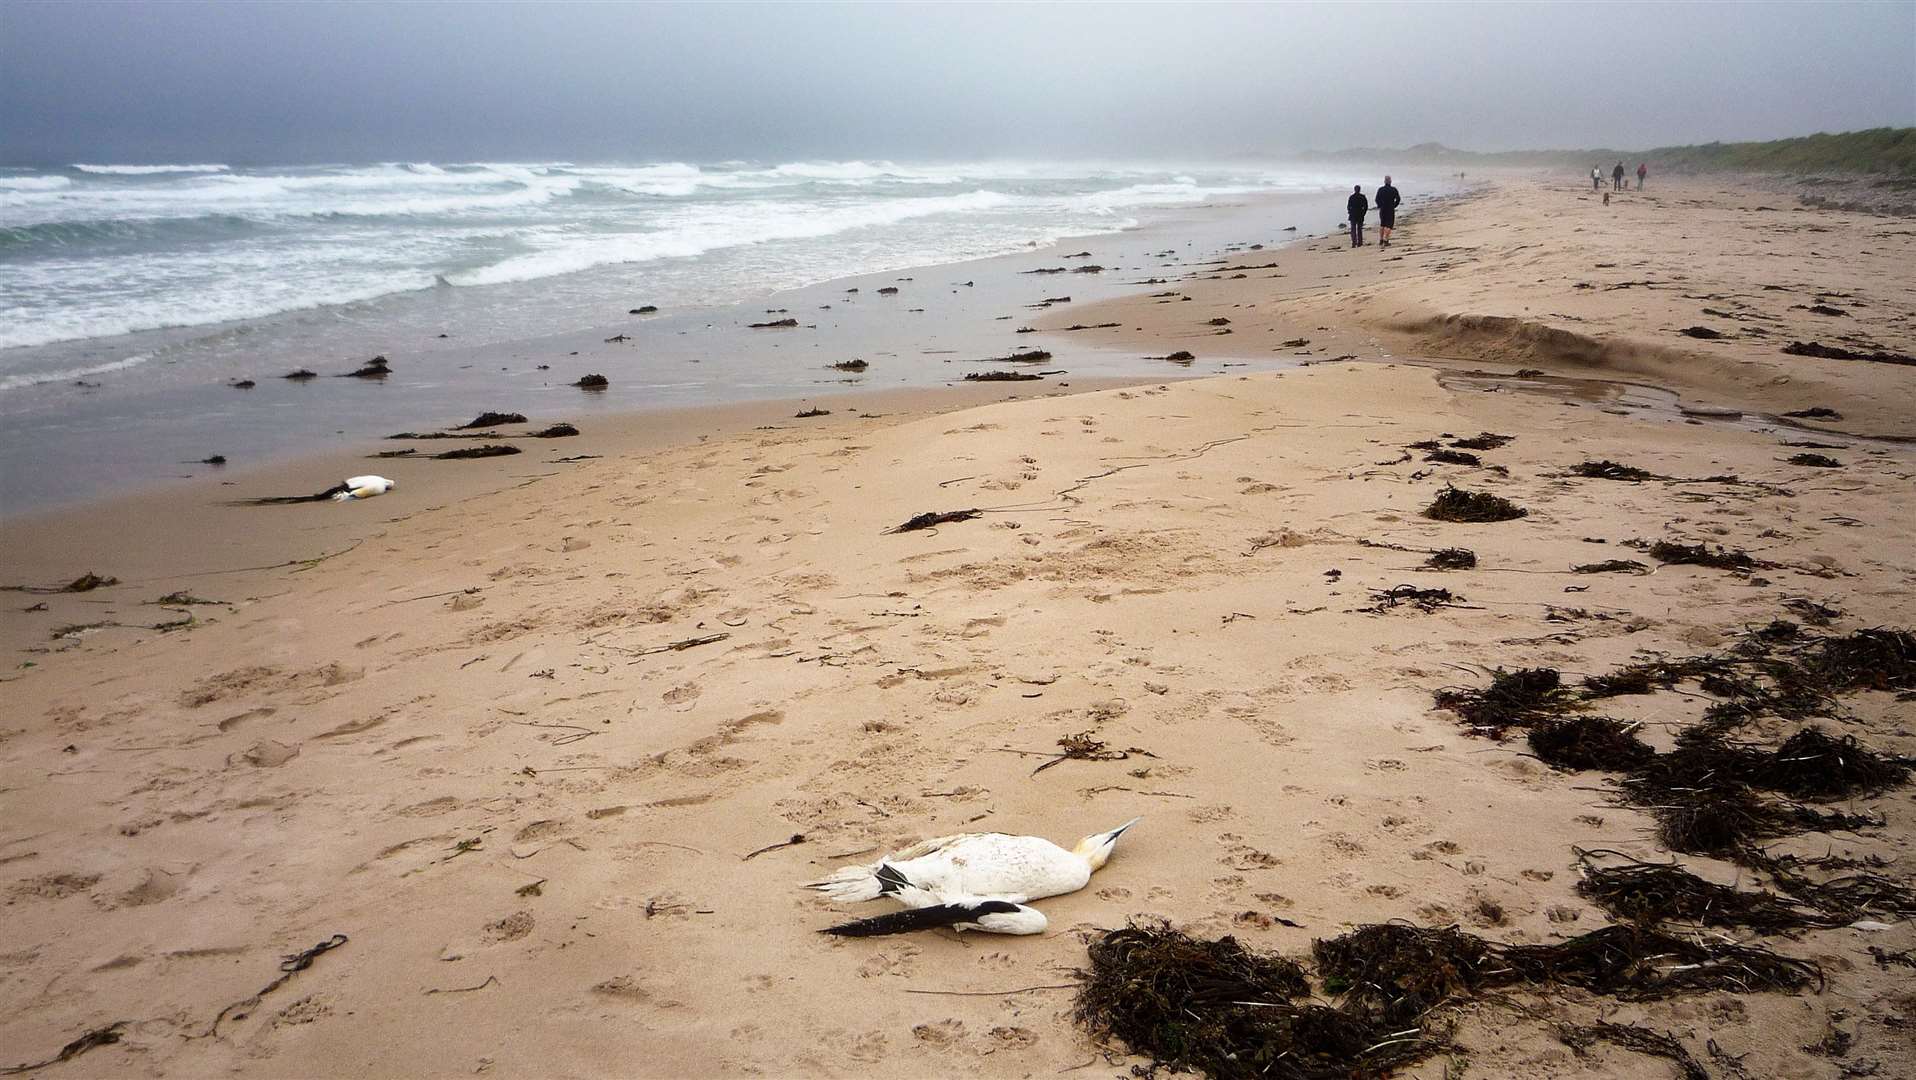 Many carcases of dead birds are lying on beaches around the Caithness coast. Picture: DGS